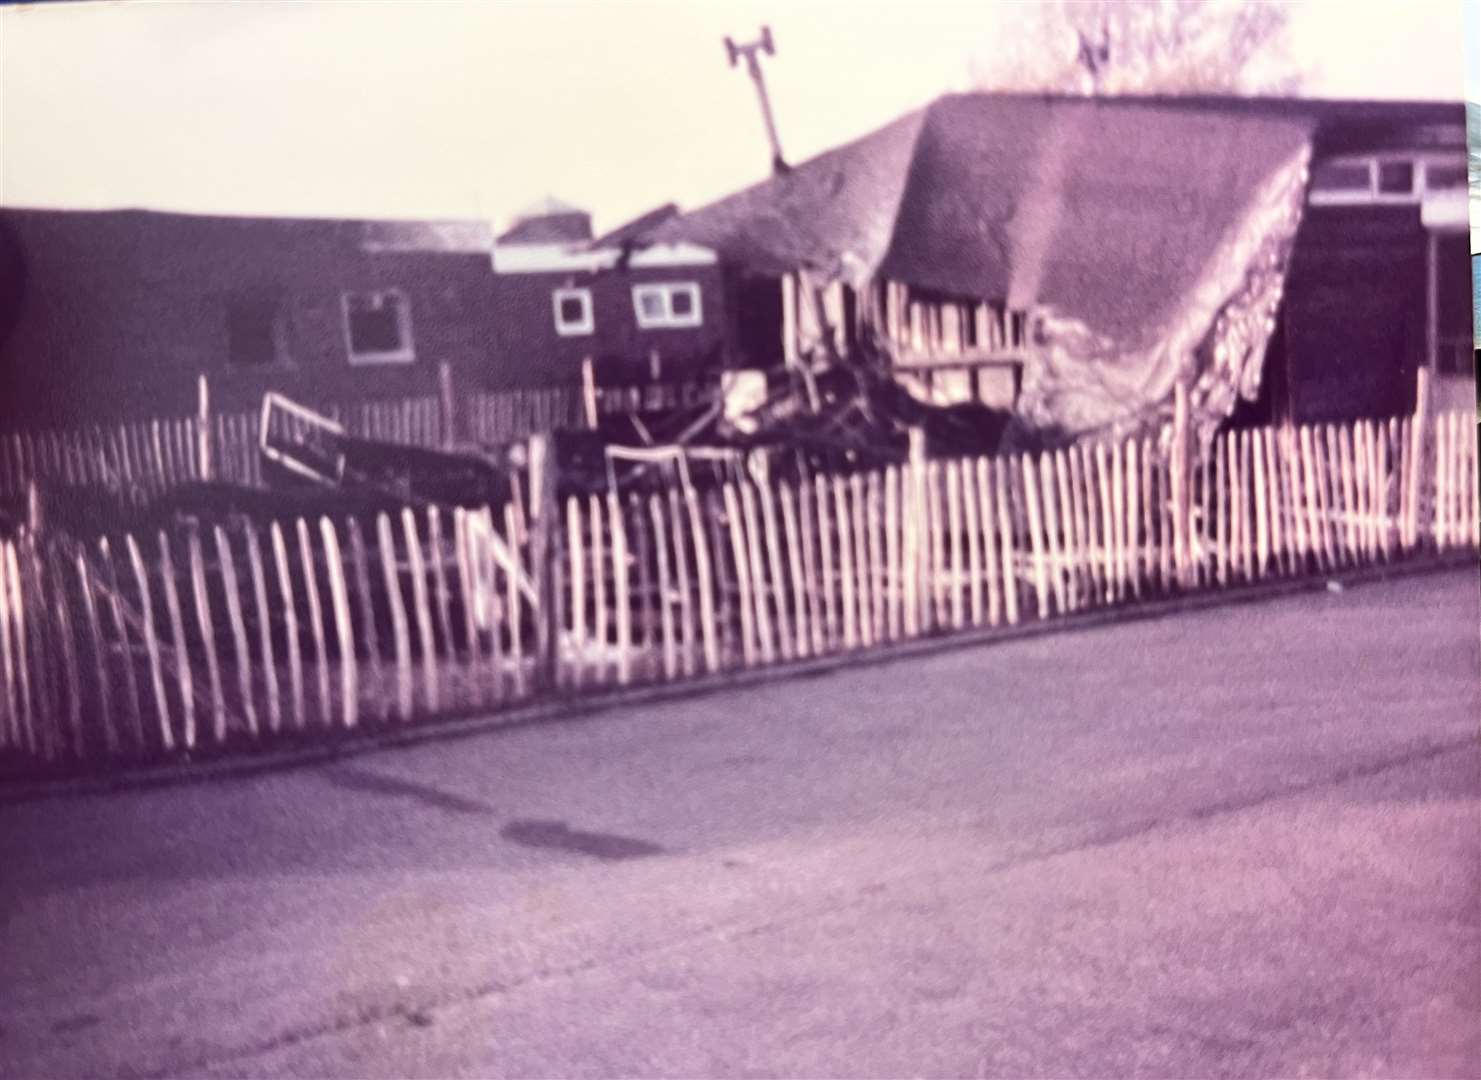 The Great Storm of 1987 damaged the school building in St Edmunds Road, Dartford